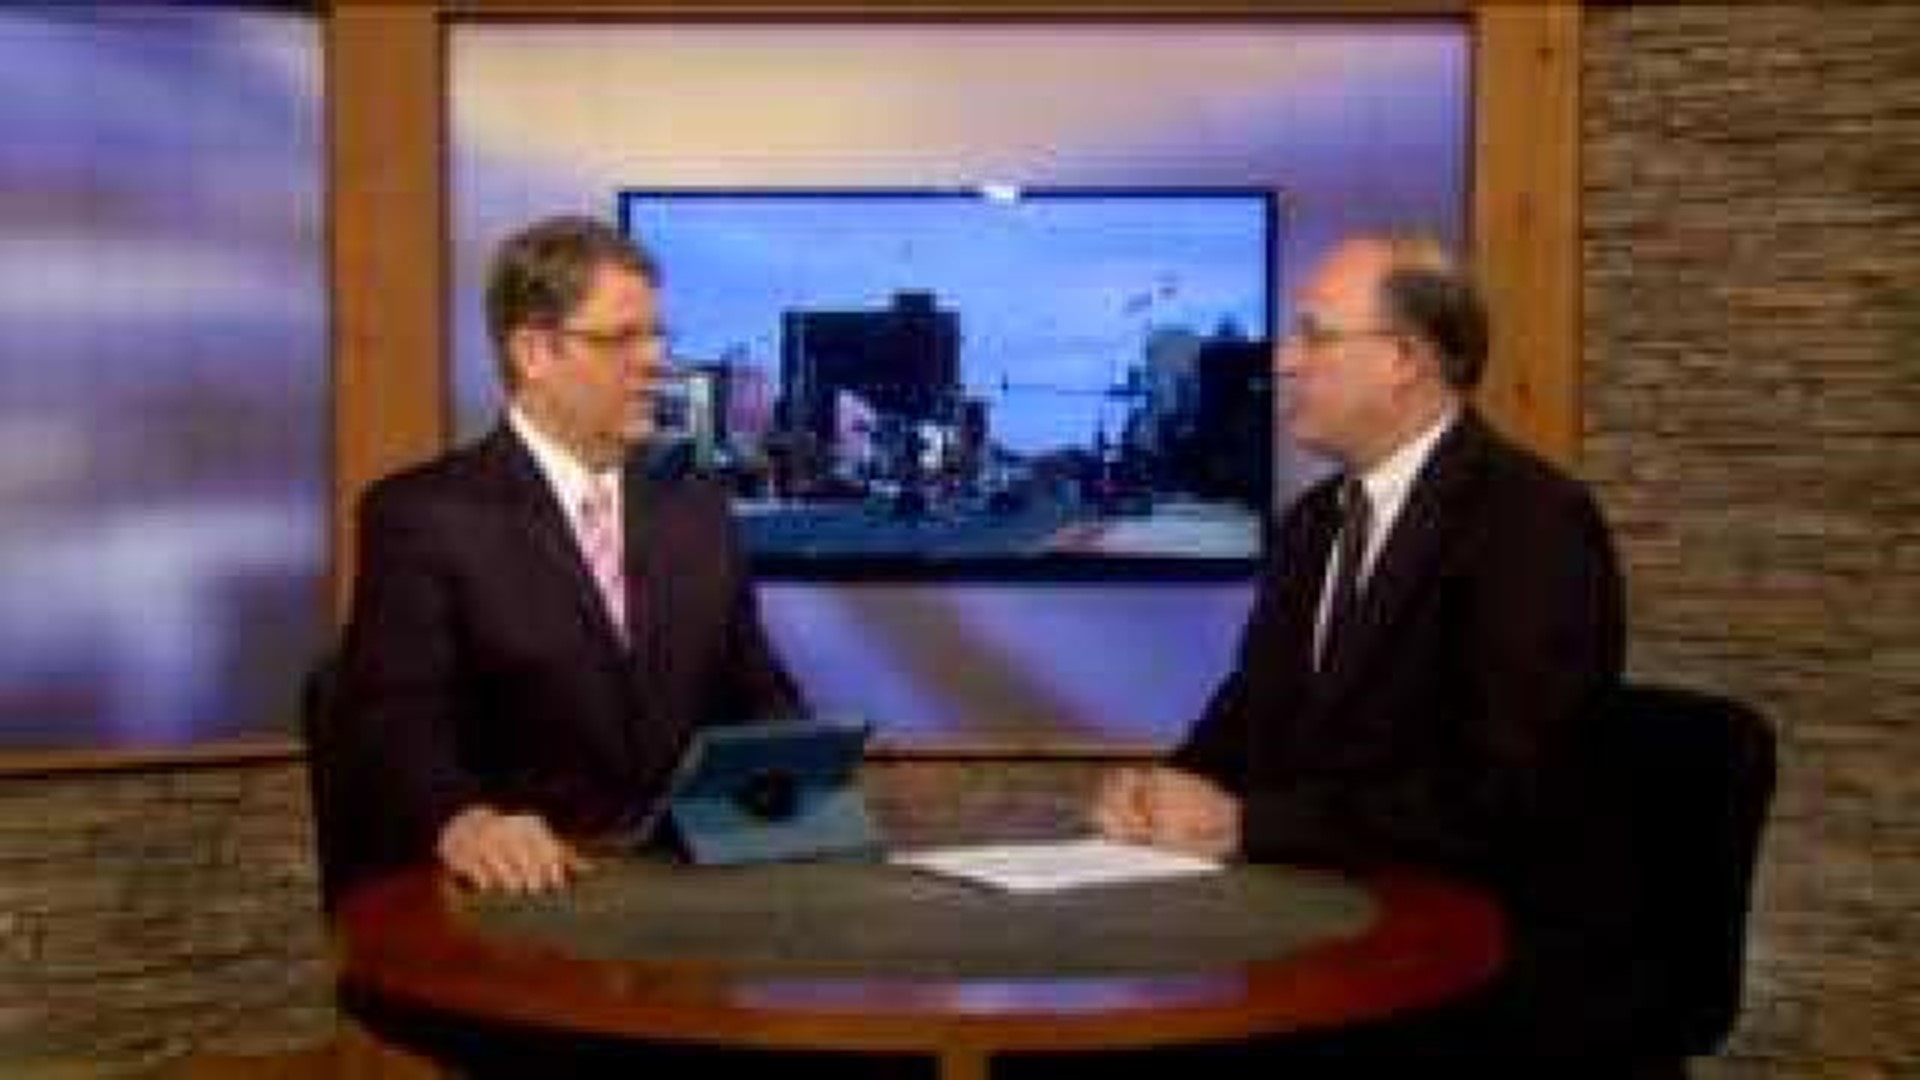 City Director Discusses Fort Smith Projects